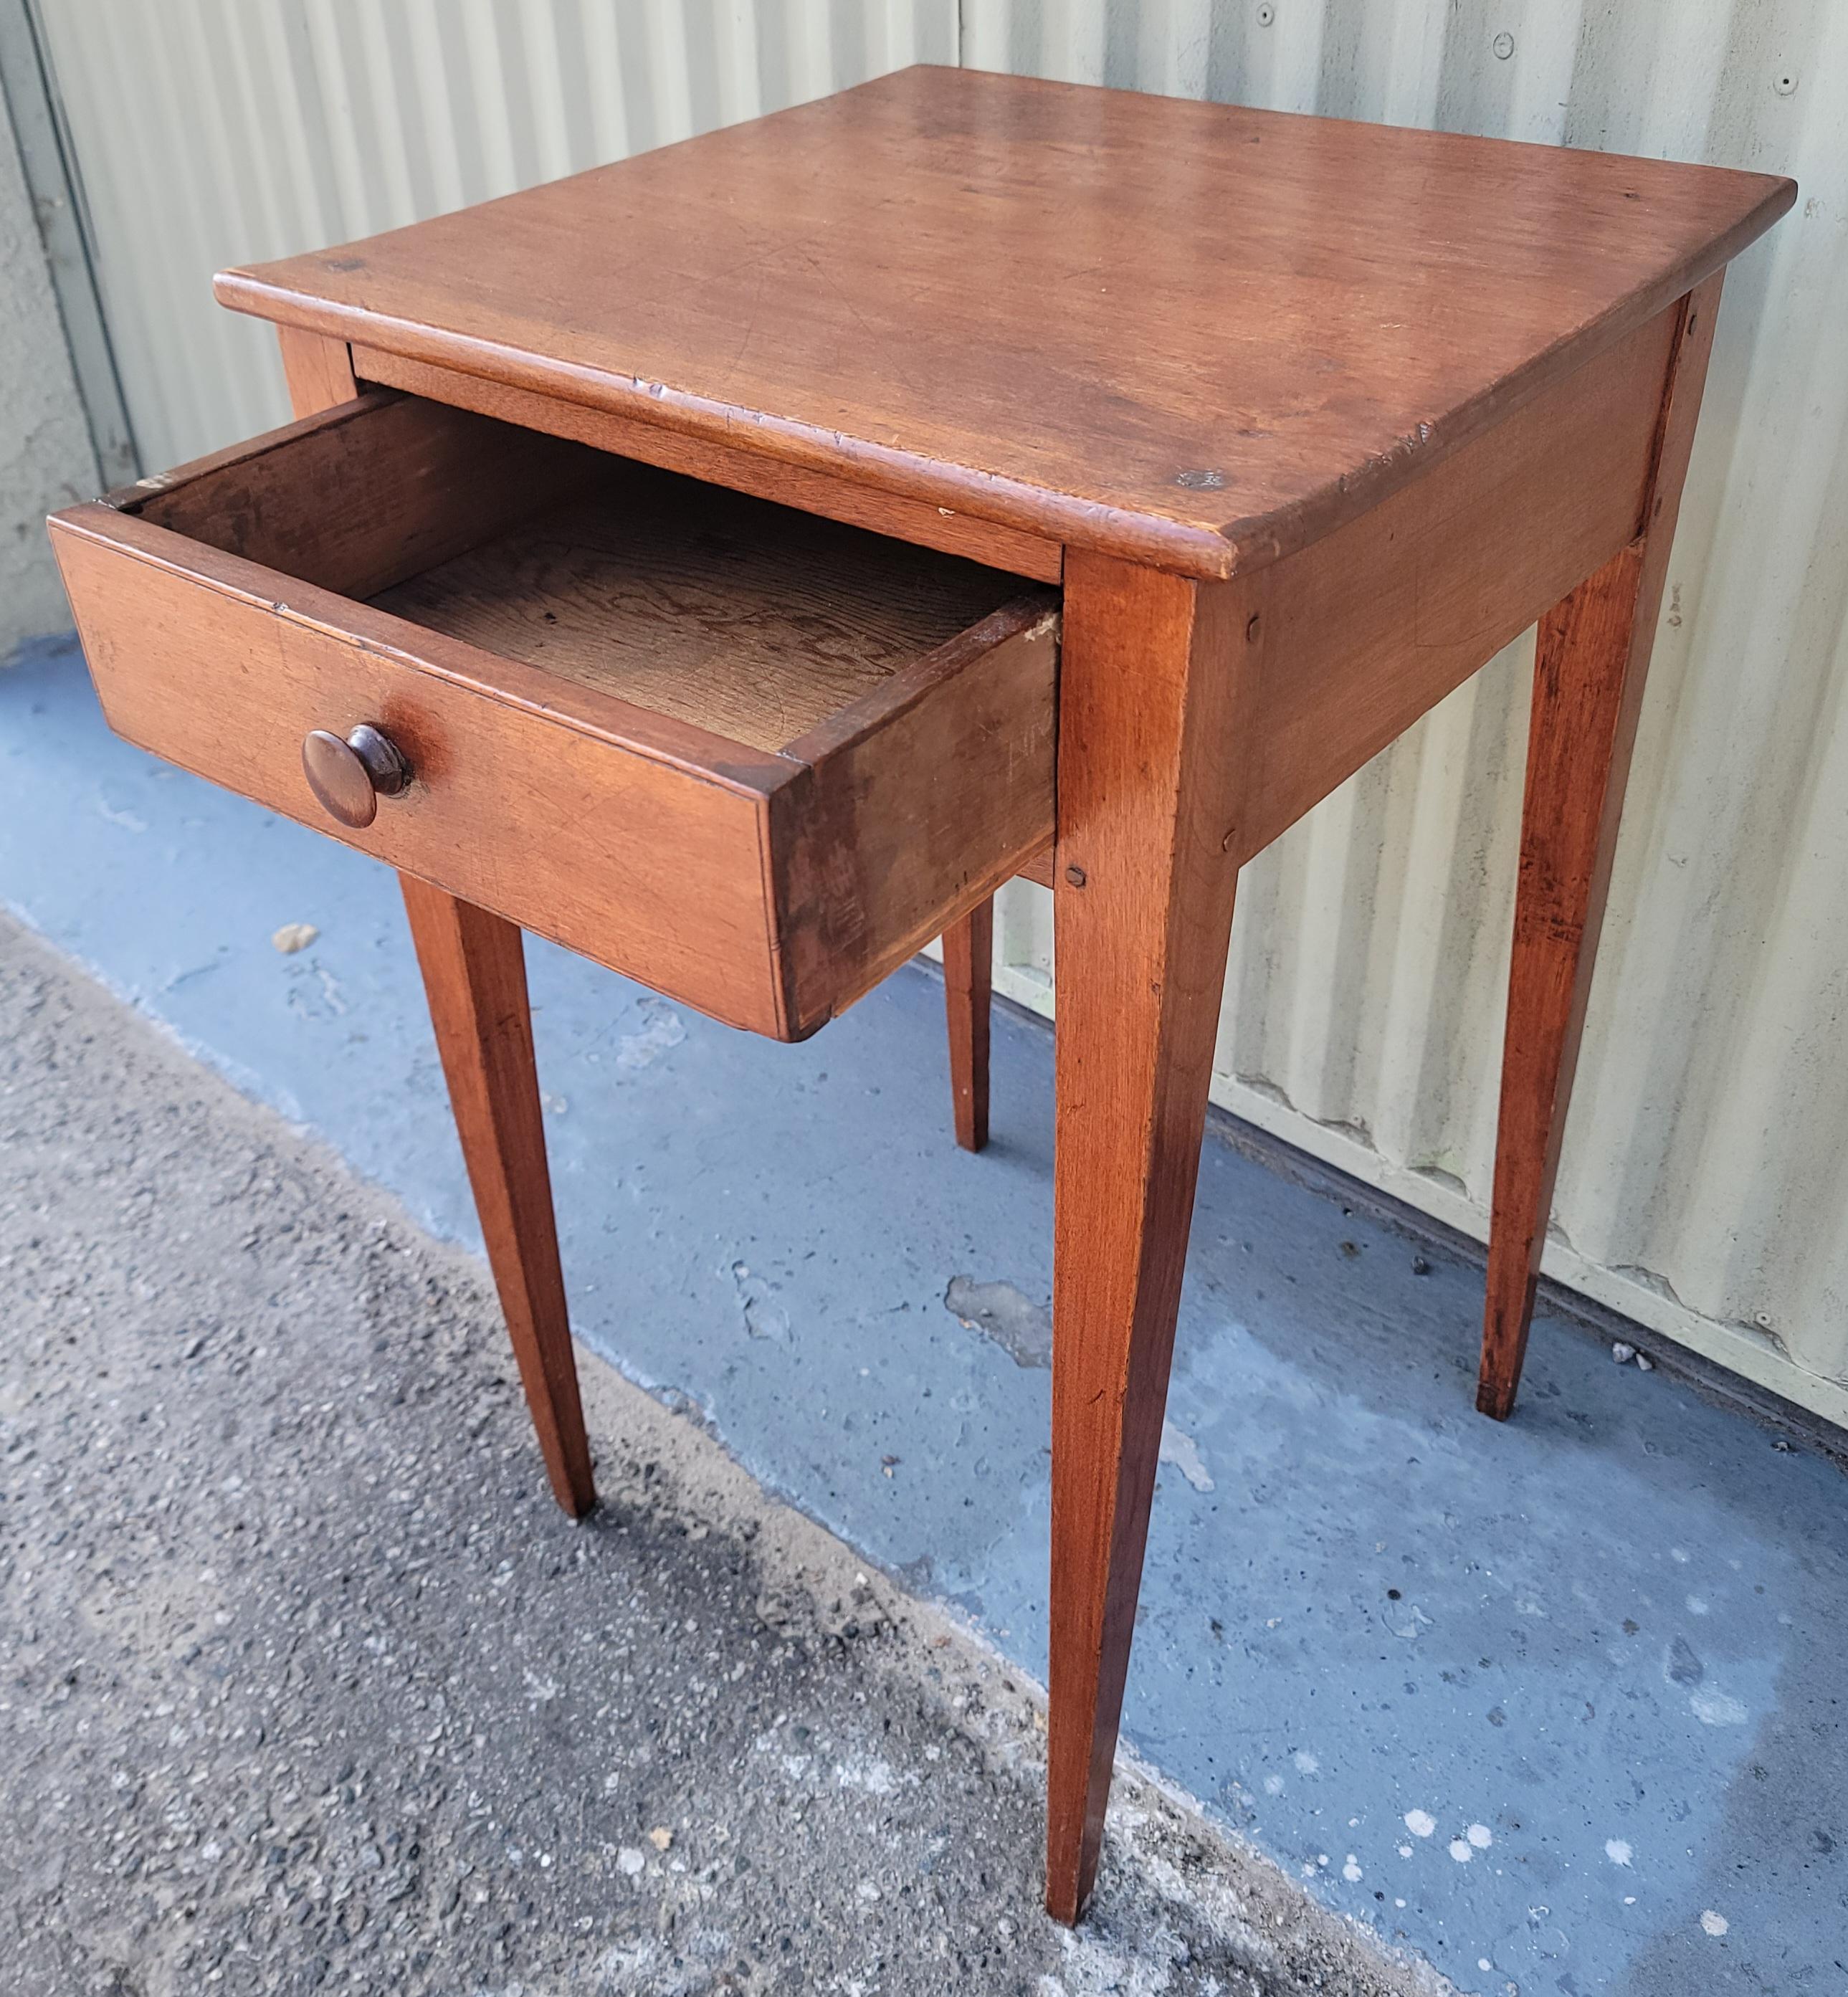 19Thc Original walnut patina and great surface one drawer stand.The condition is very good and sturdy. Construction is early cut nails & wood pegs with a dovetailed drawer.